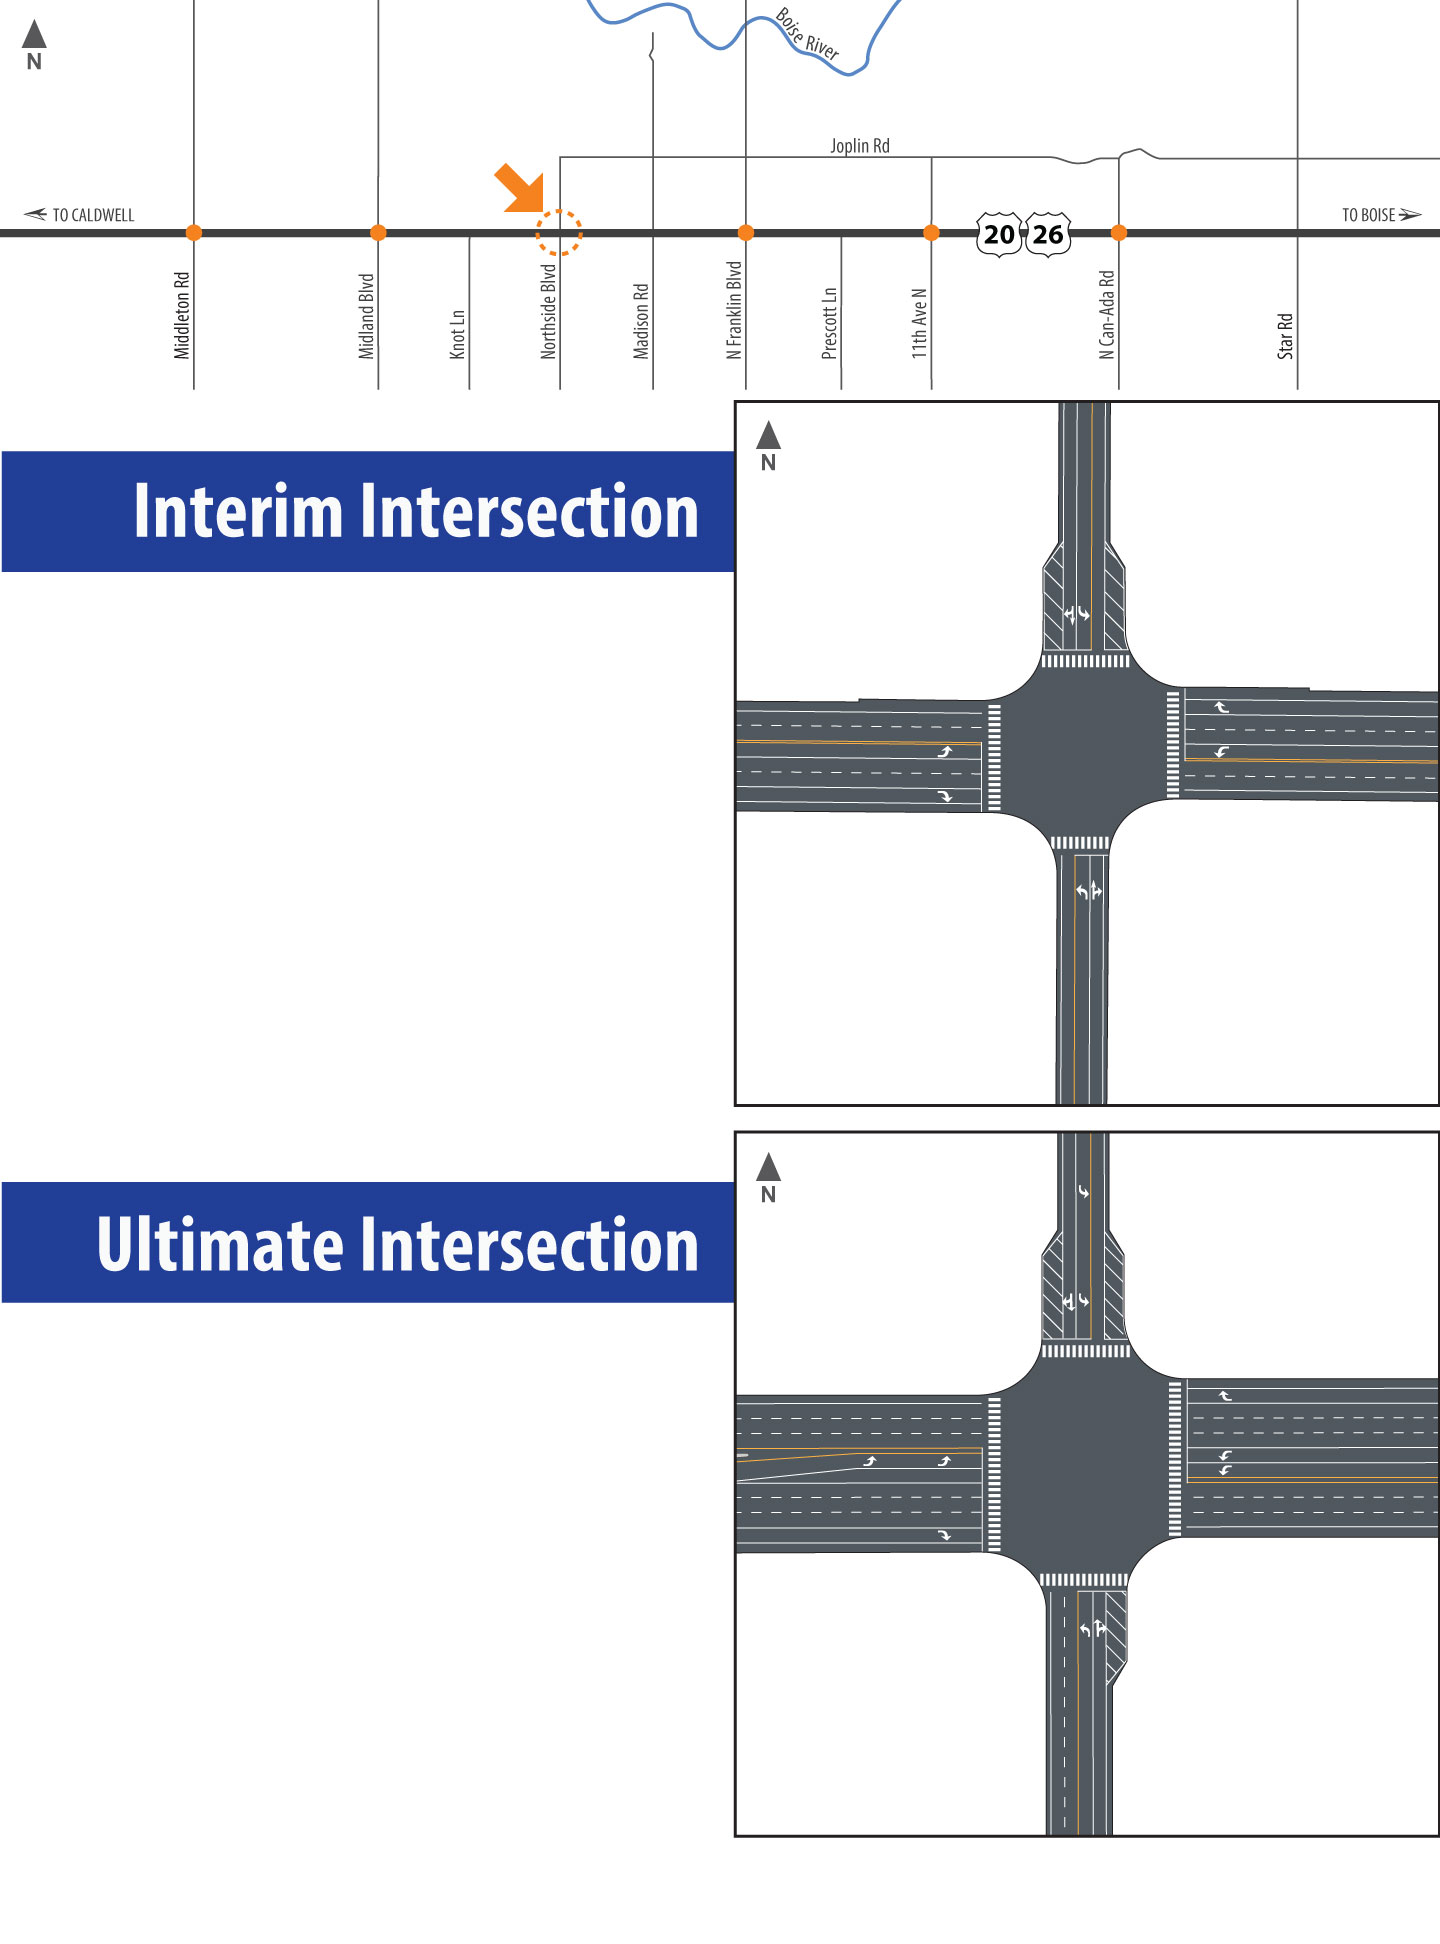 Map and graphics of Northside Boulevard Intersection showing interim and ultimate improvements.